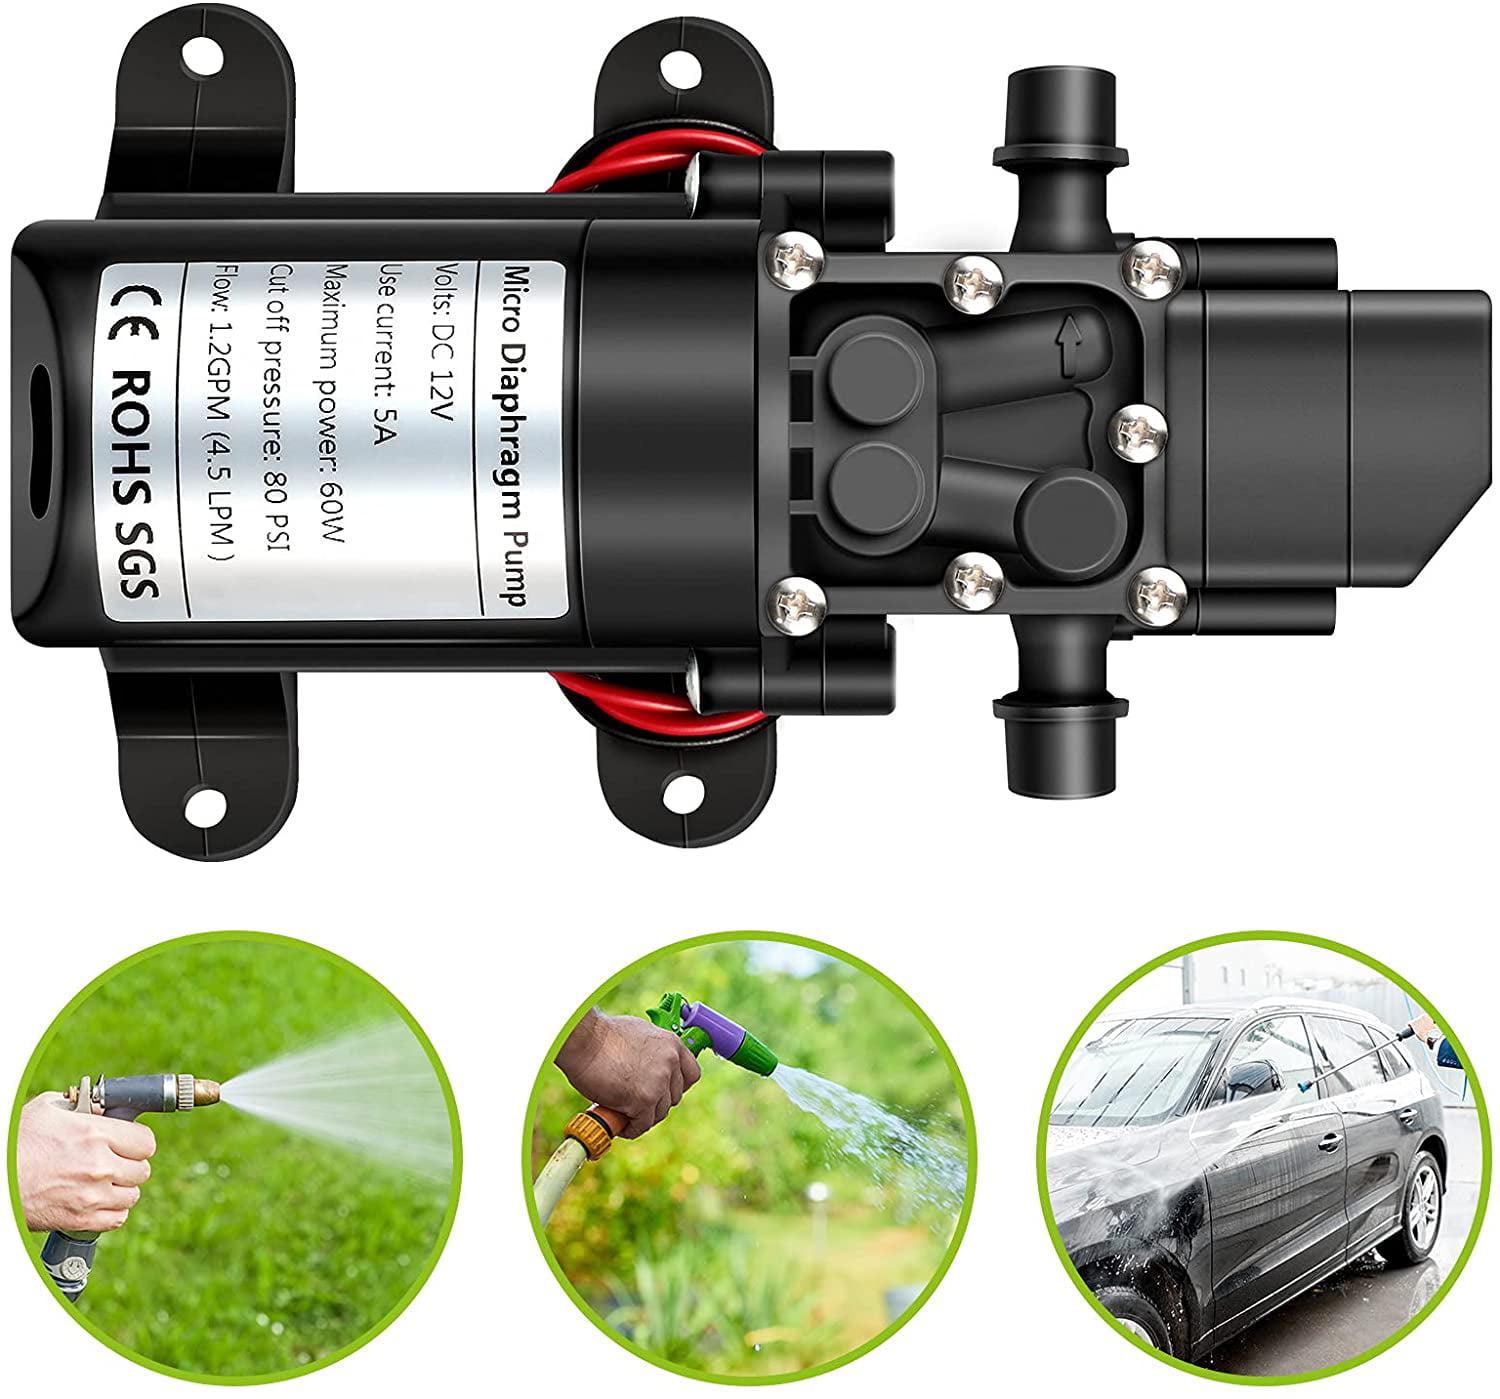 Left DC 12V Fresh Water Pump 4.5LPM 1.2GPM 80PSI Diaphragm Pump Self Priming Sprayer Pump 5A 60W Diaphragm Pump with Pressure Switch and 2 Hose Clamps Adjustable for Boat Lawn RV Camper Marine 